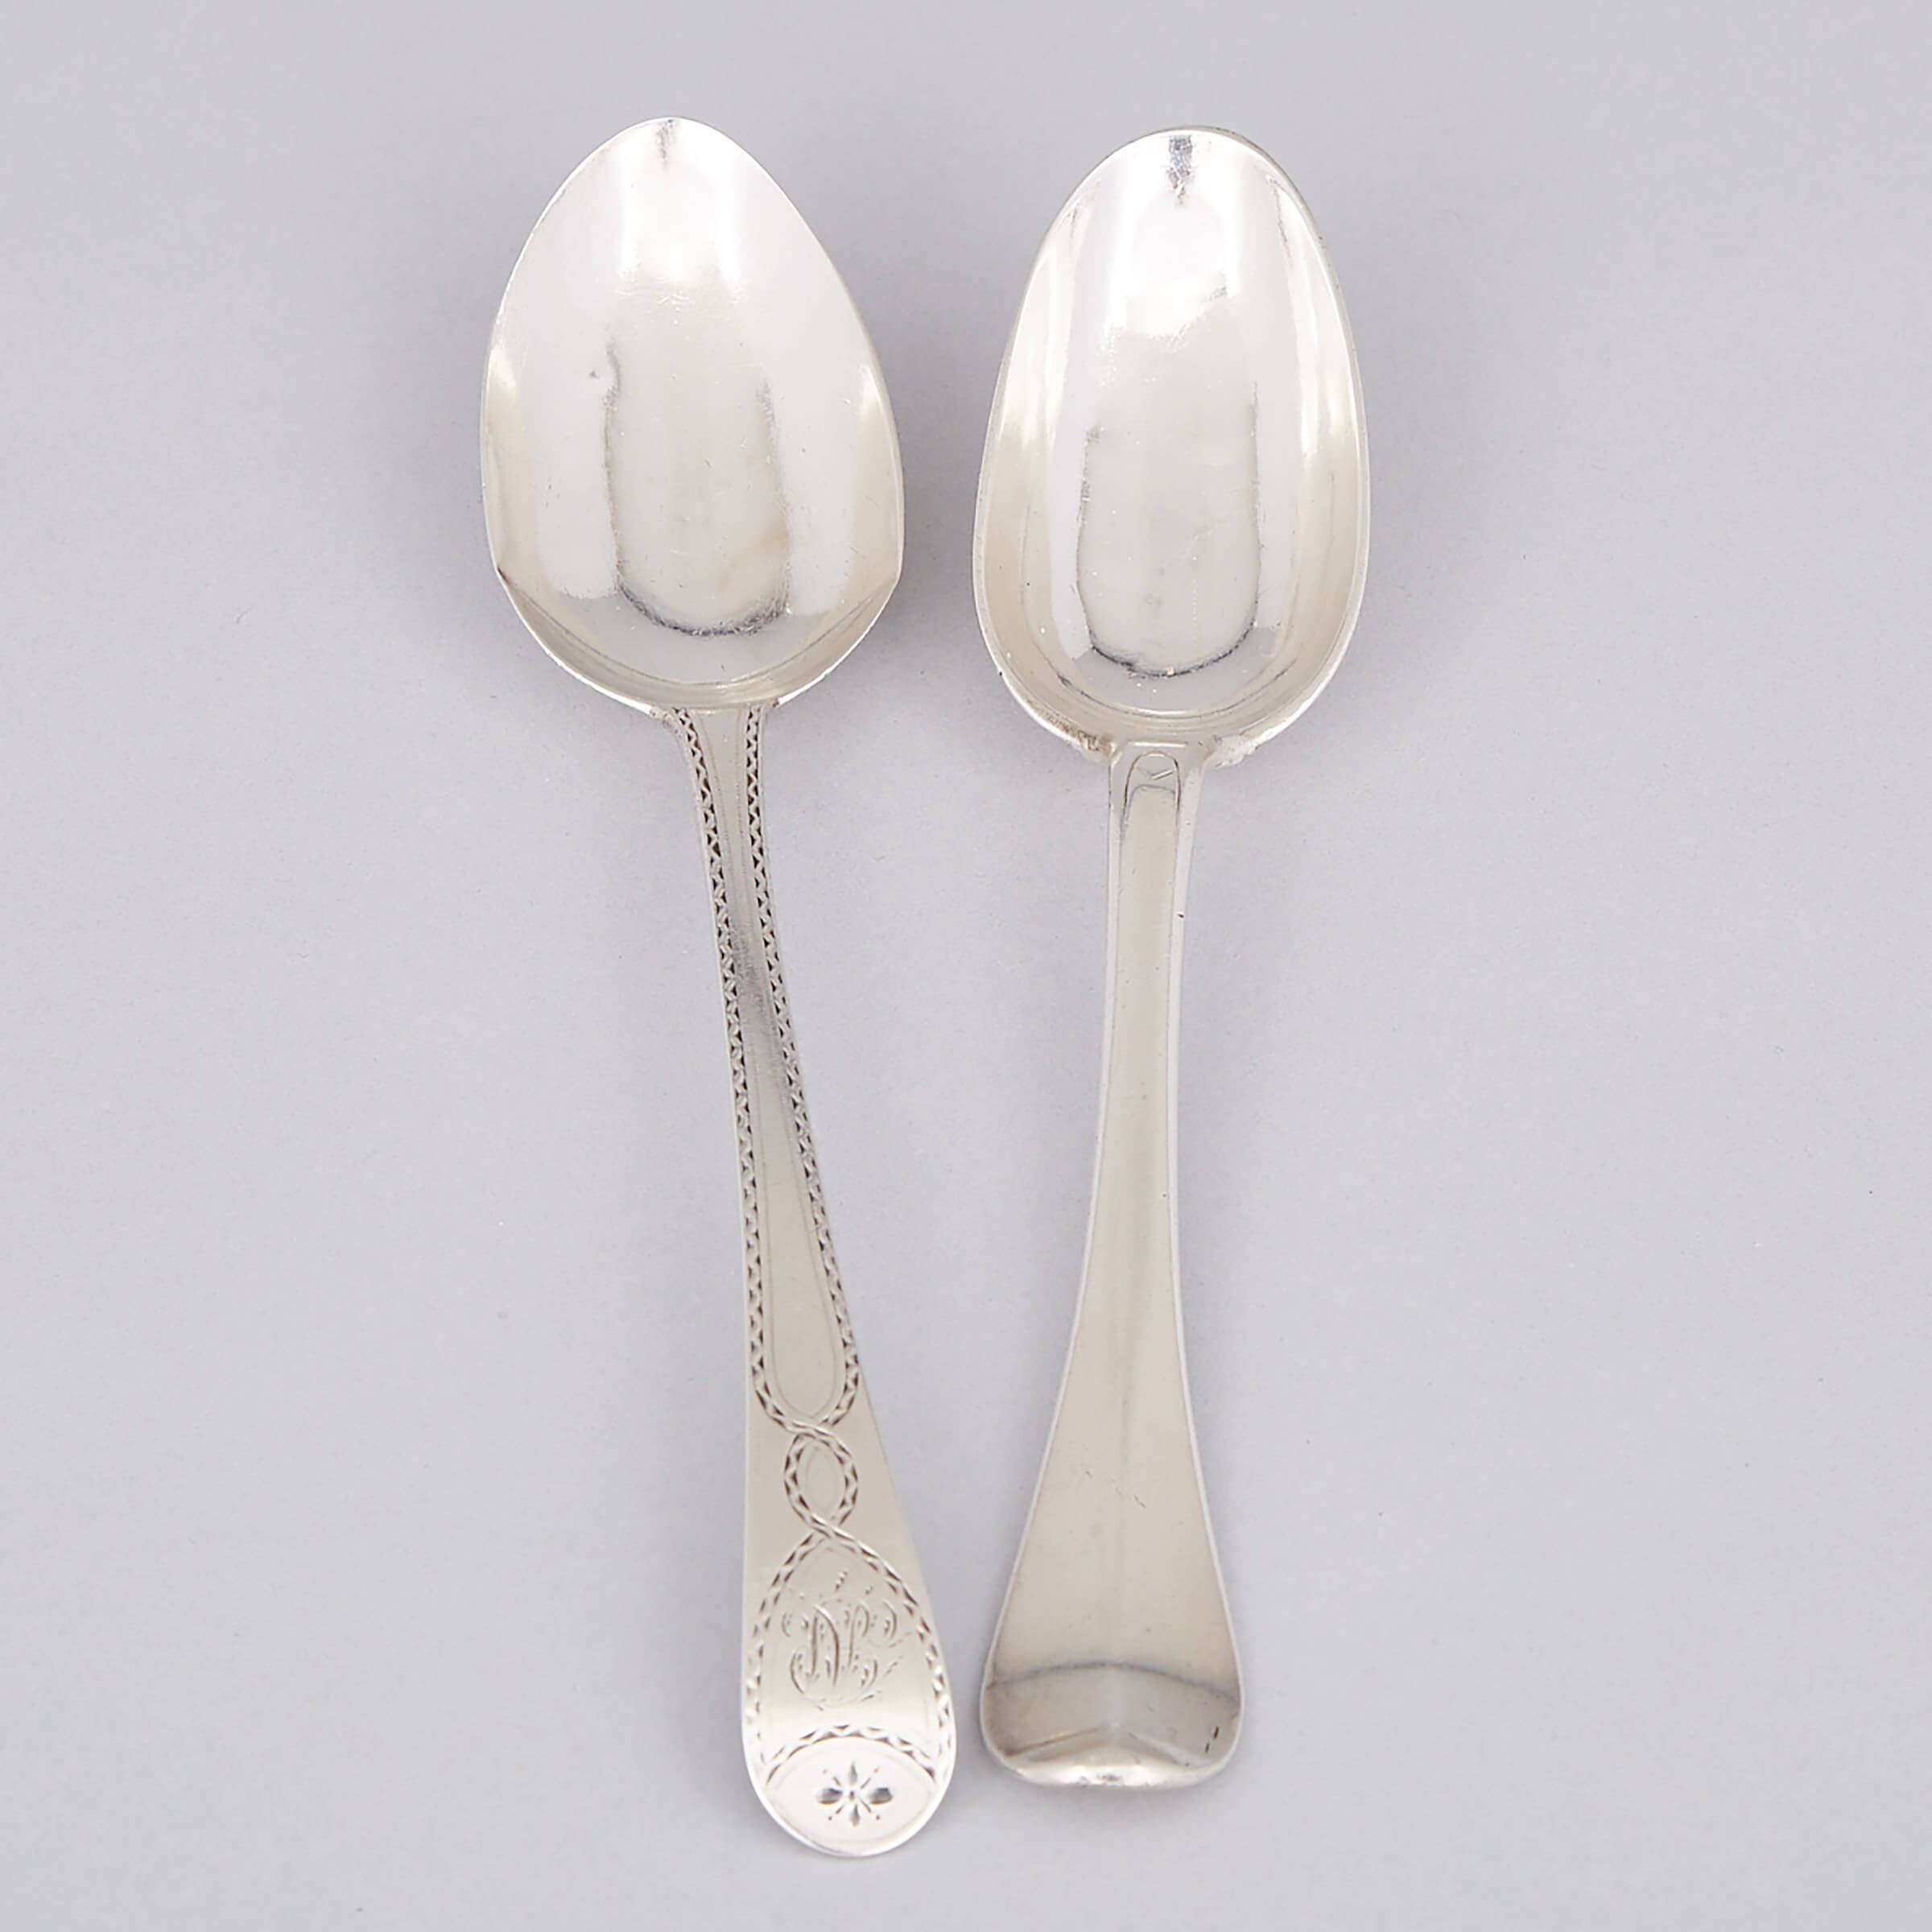 George III Silver Bright-Cut Table Spoon, Hester Bateman, London, 1779, and another, French, Bordeaux, c.1700